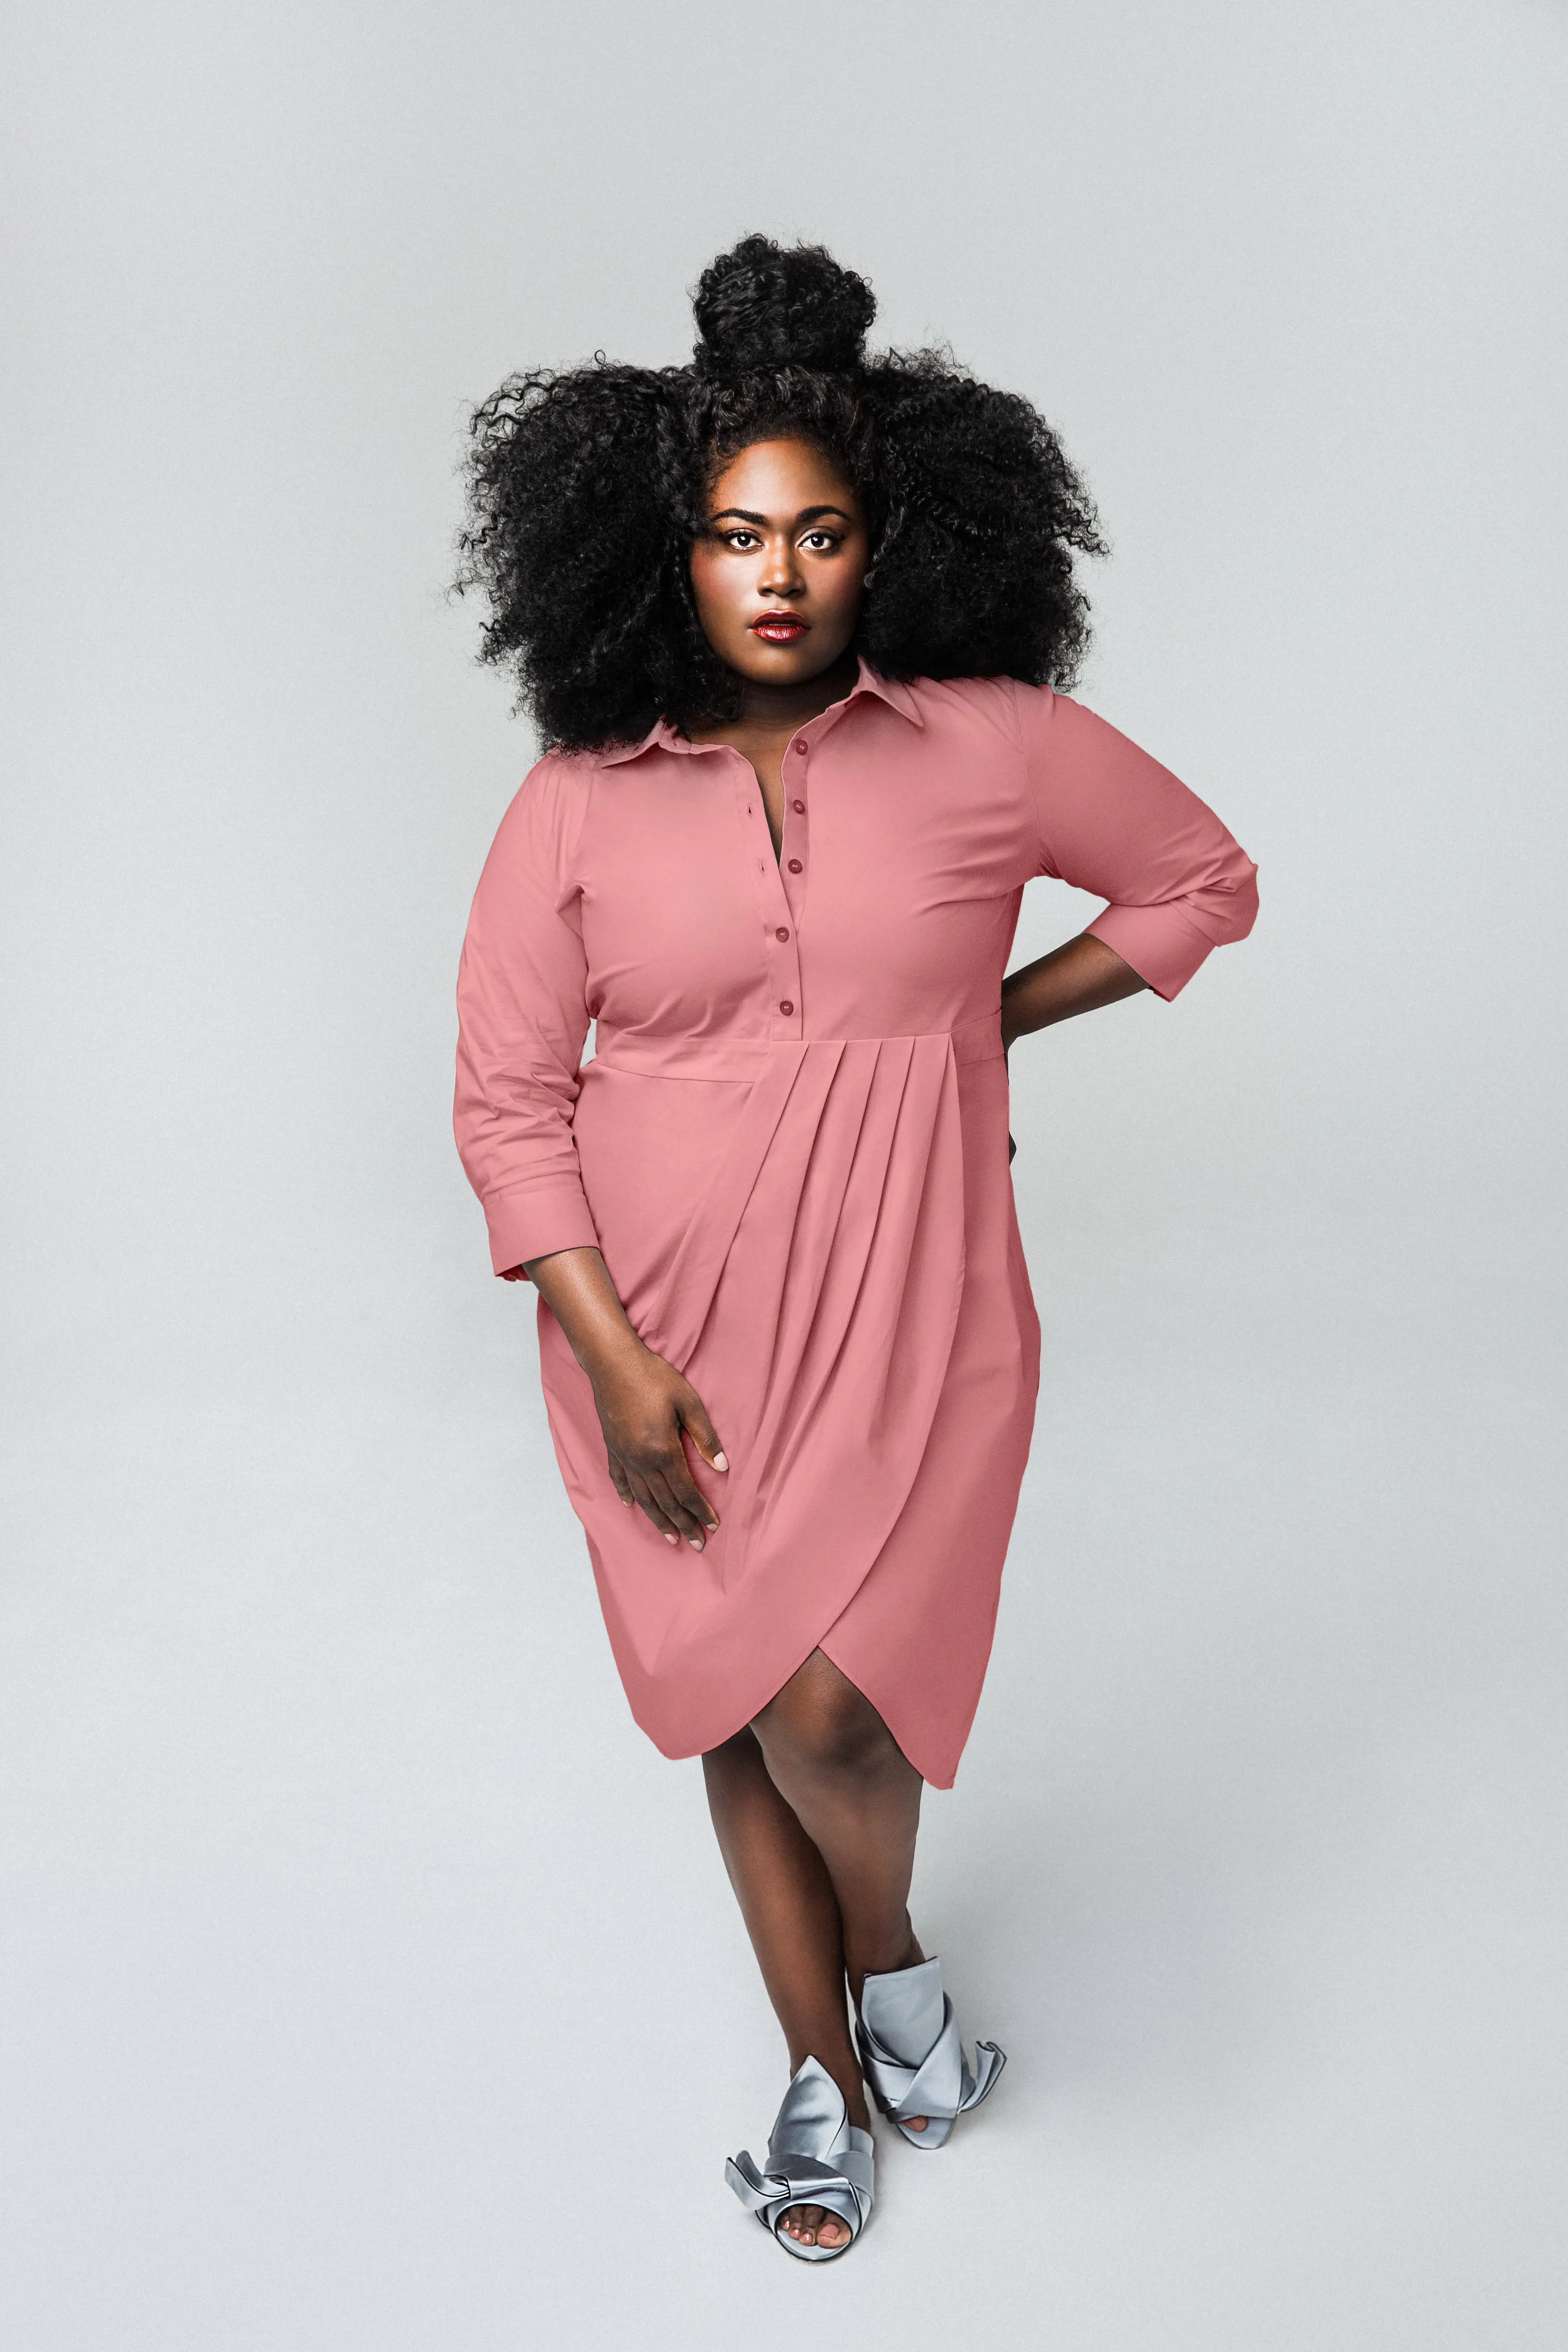 Danielle Brooks Reveals Her Dress Size: The True Fit Of A Size 14 ...